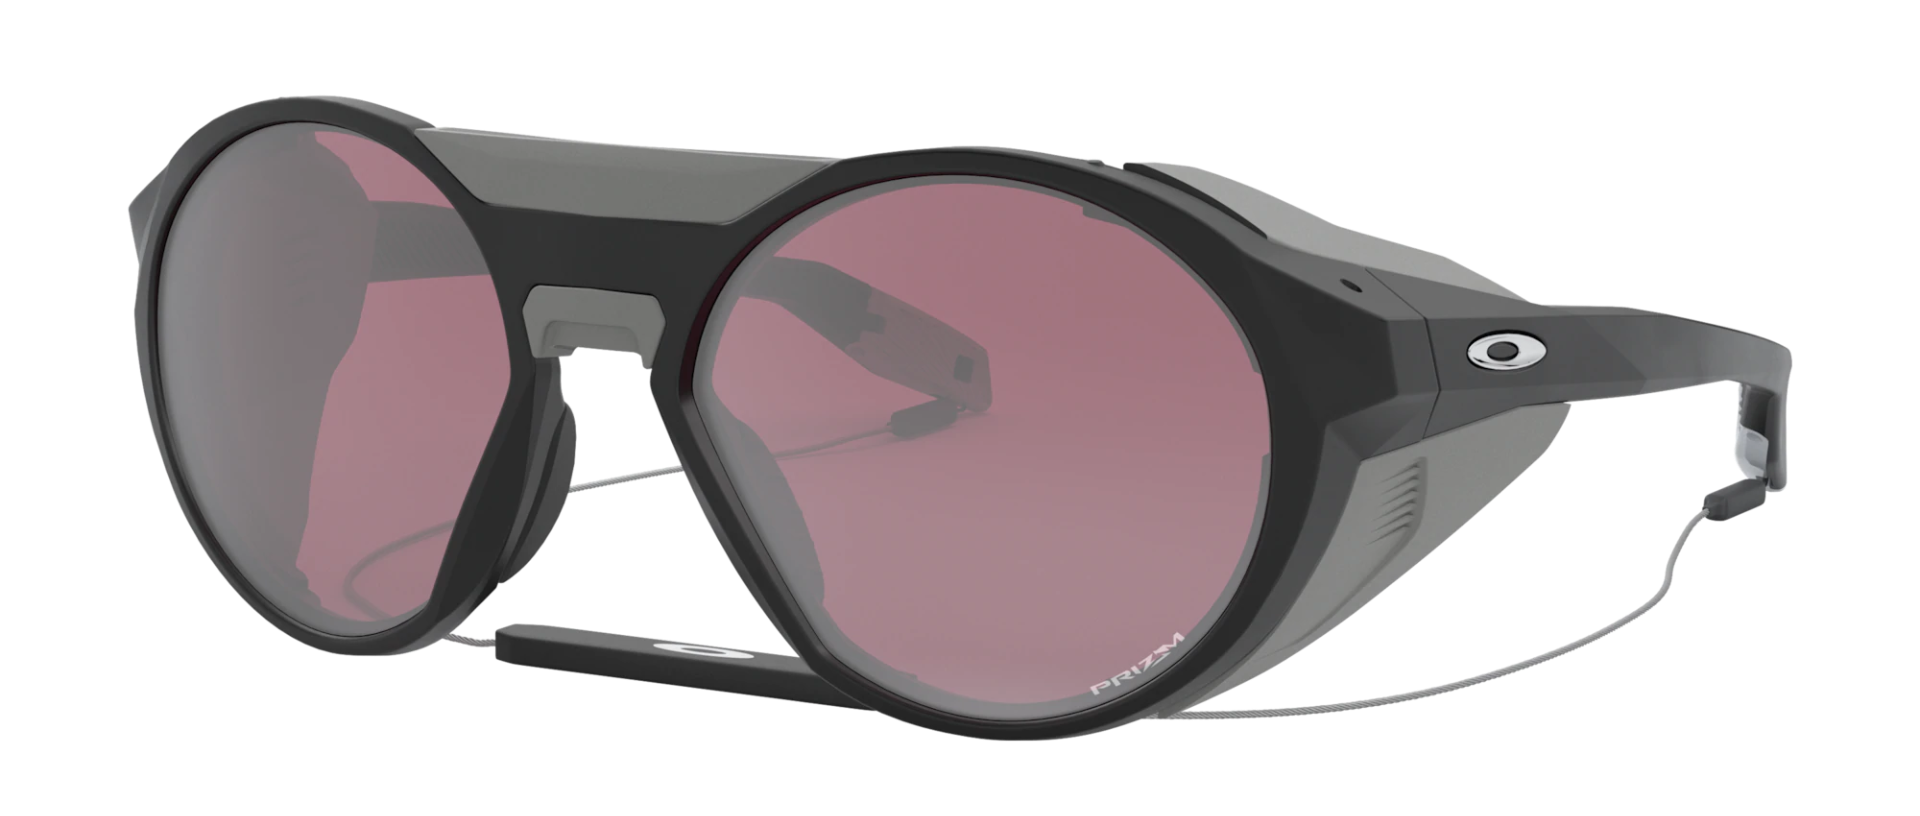 oakley clifden mountaineering sunglasses in black with prizm snow black lenses